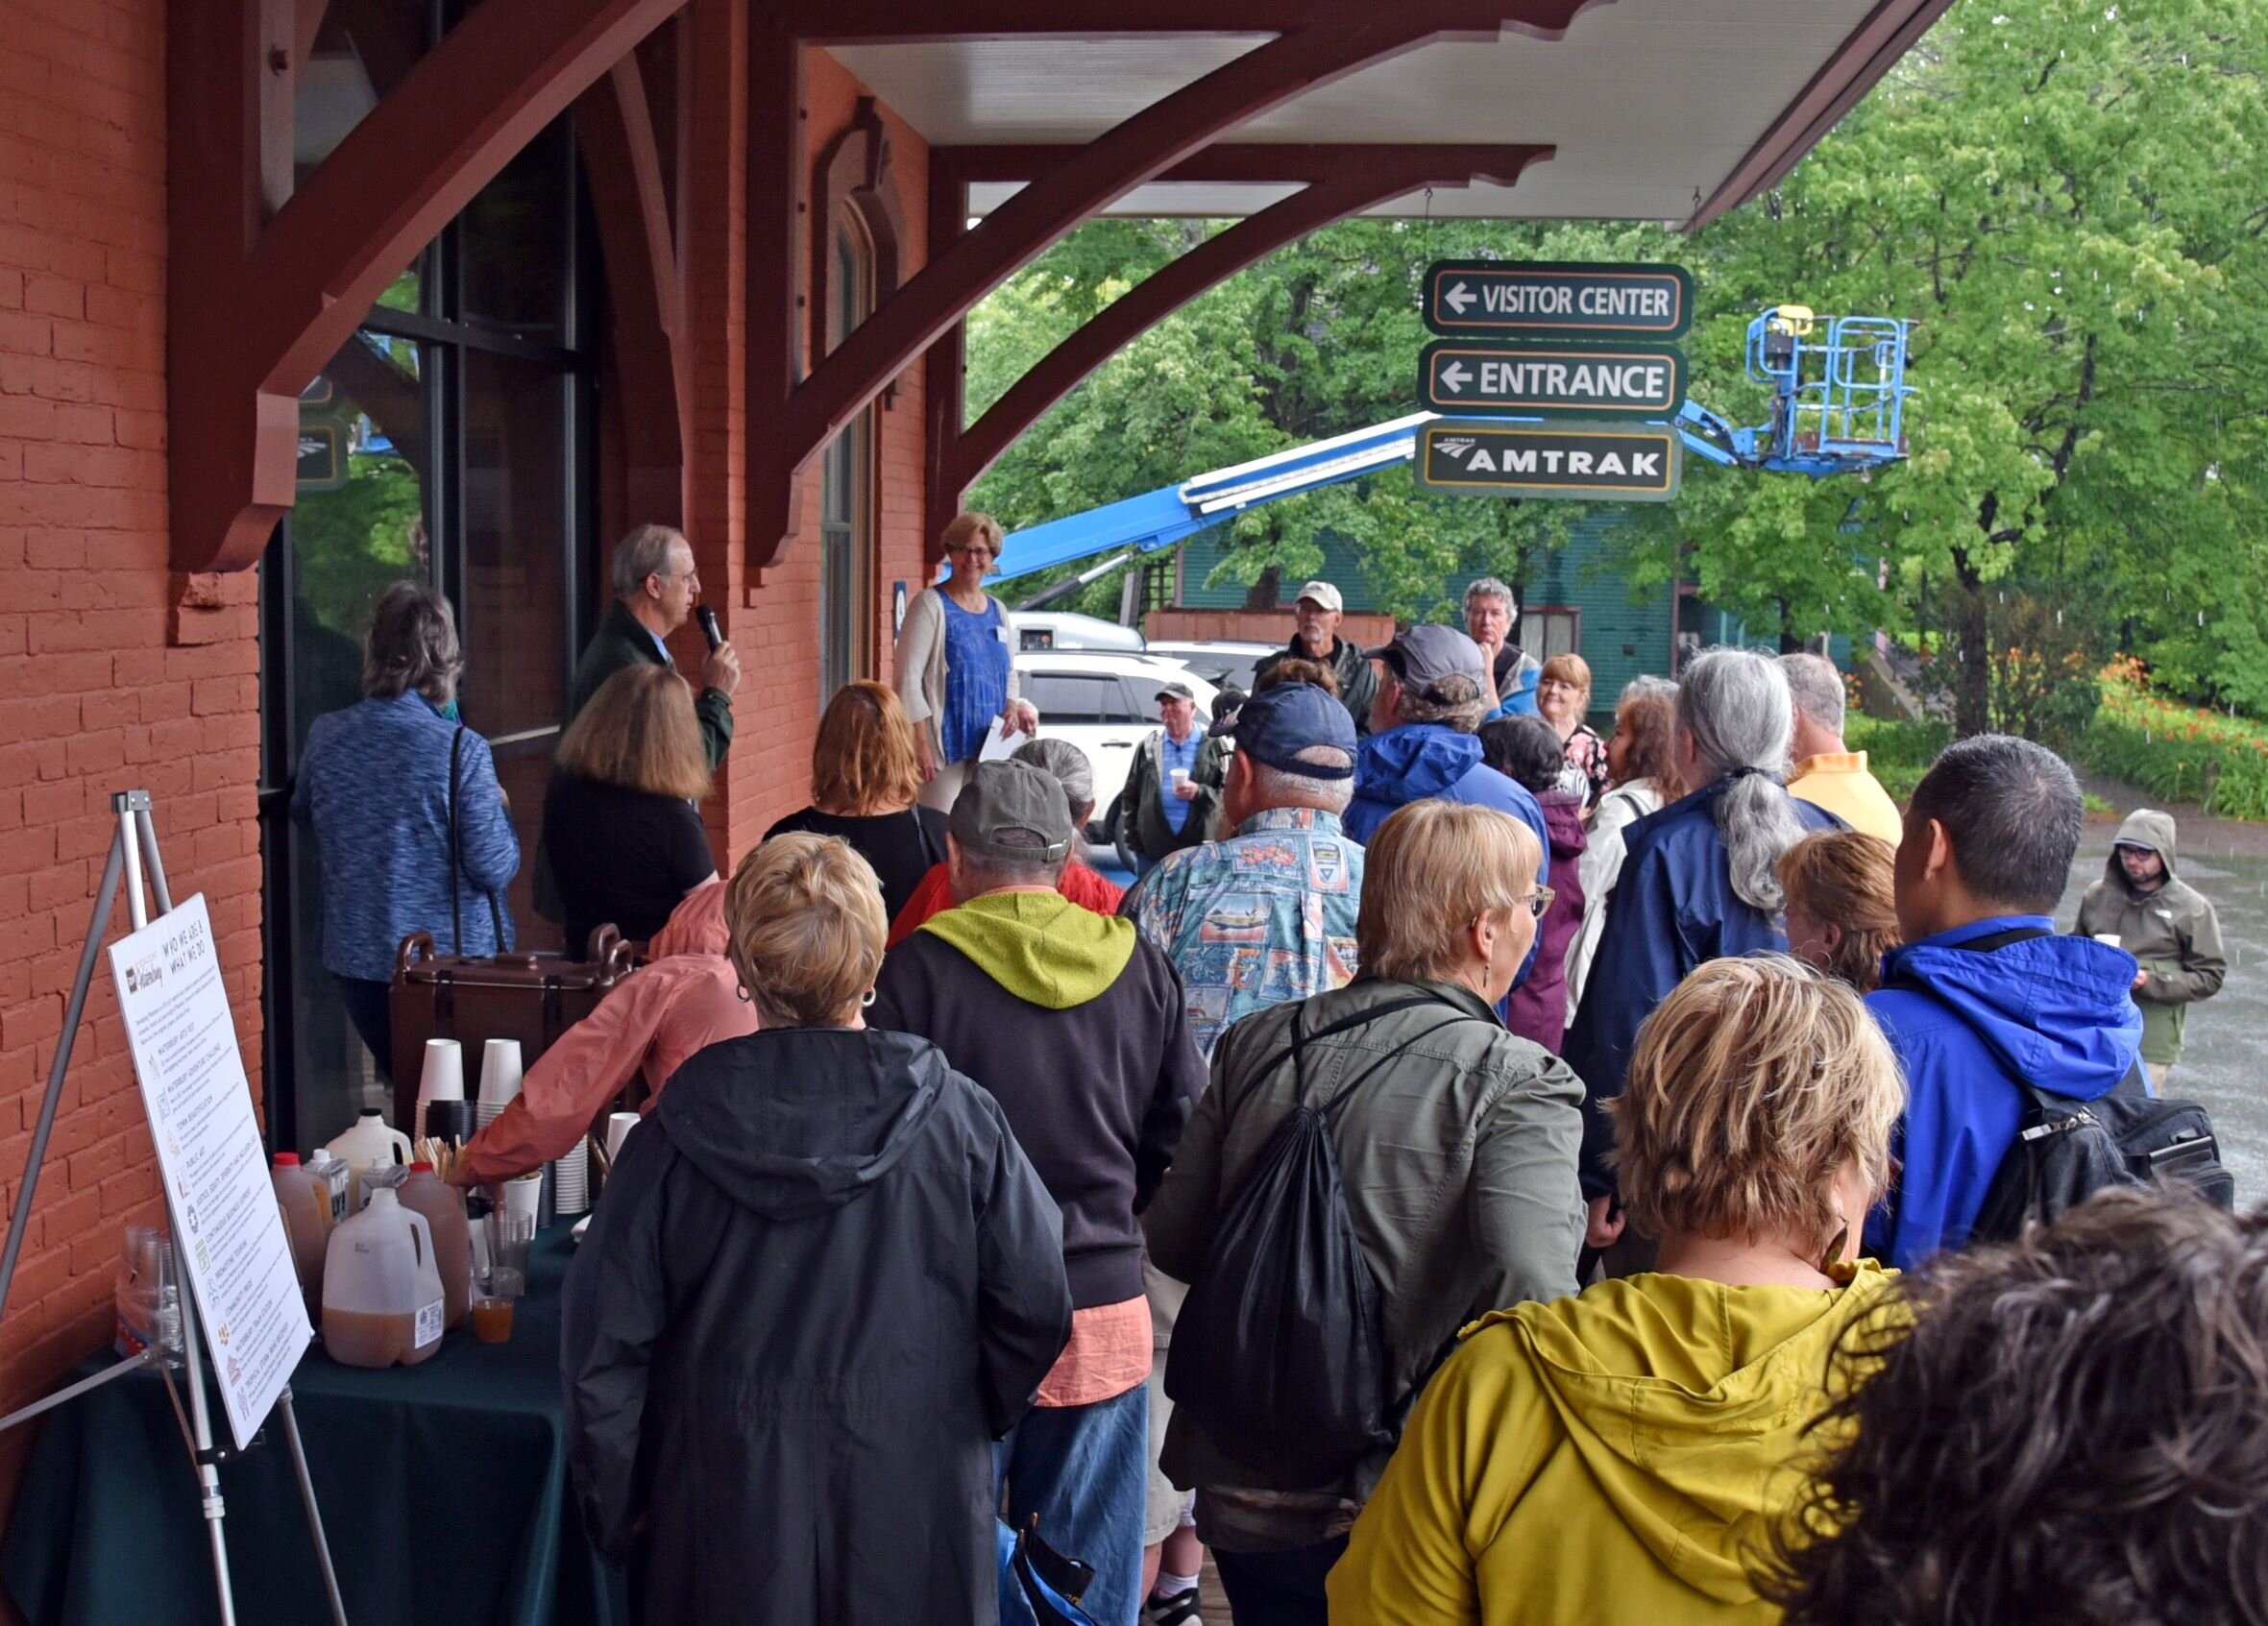   Municipal Manager Bill Shepeluk addresses the crowd before the train arrives. Members of the public filled the train station's covered porch to take cover from the rain and get closer to hear. Photo by Lisa Scagliotti  